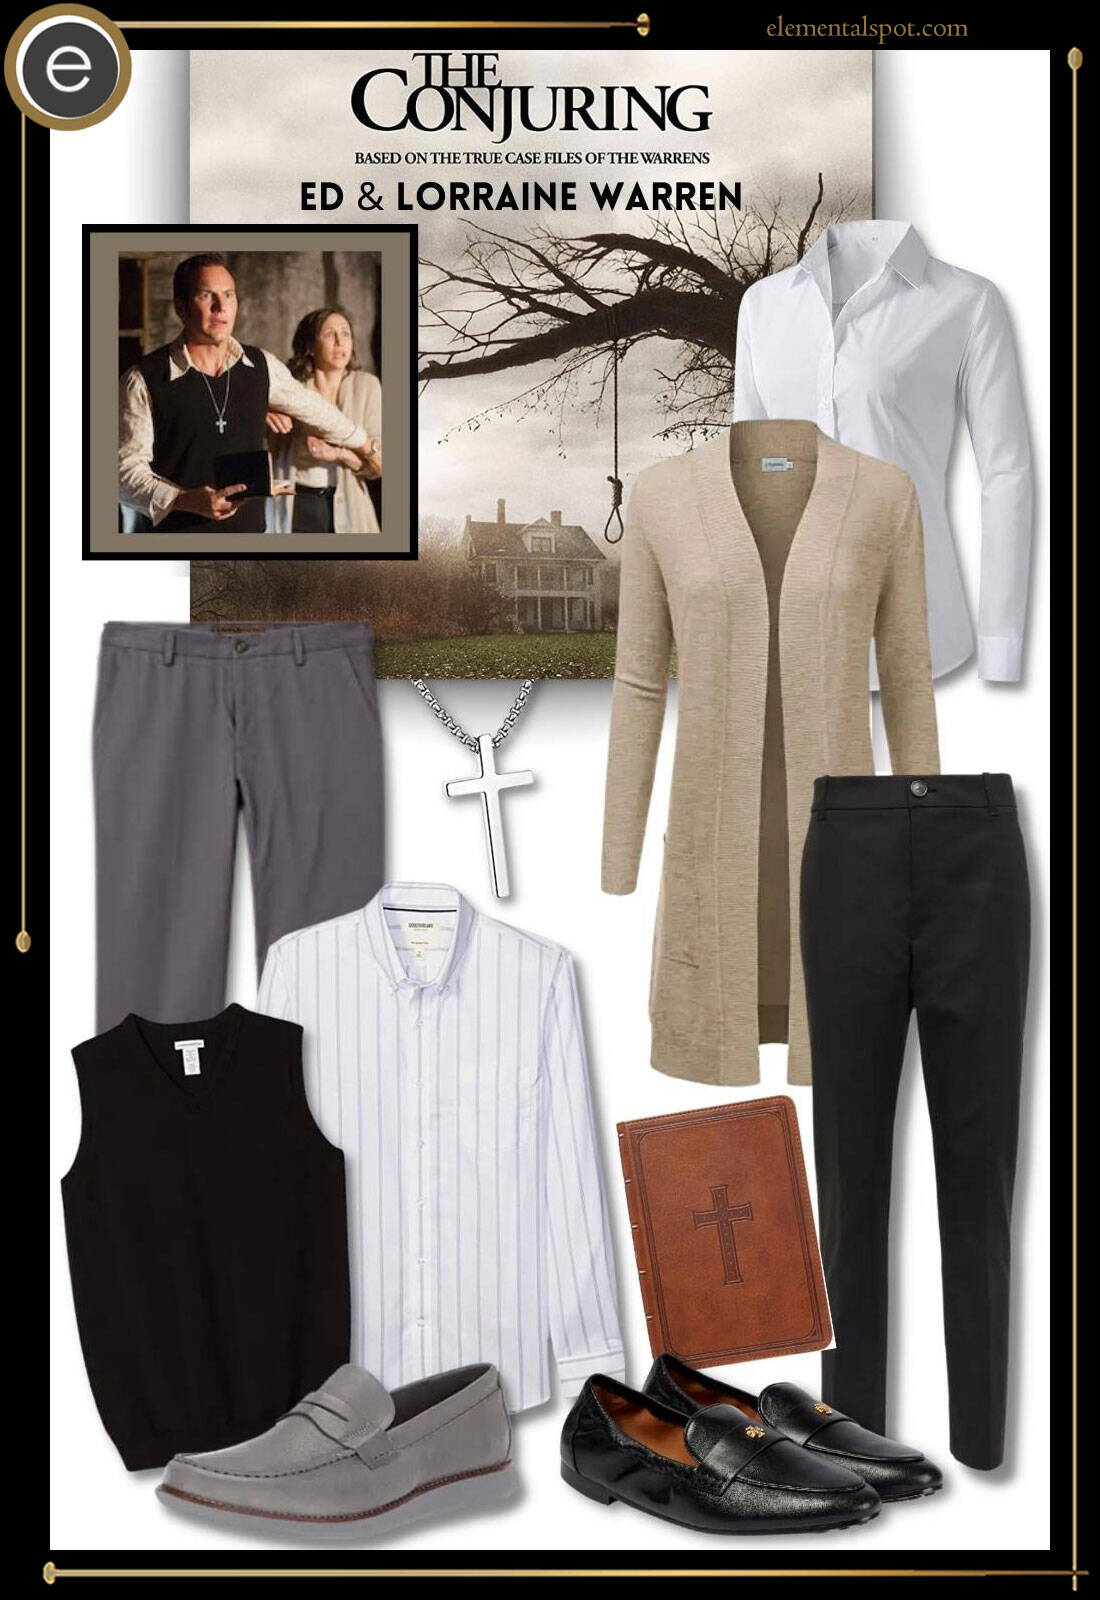 Costume-Ed and Lorraine Warren-The Conjuring